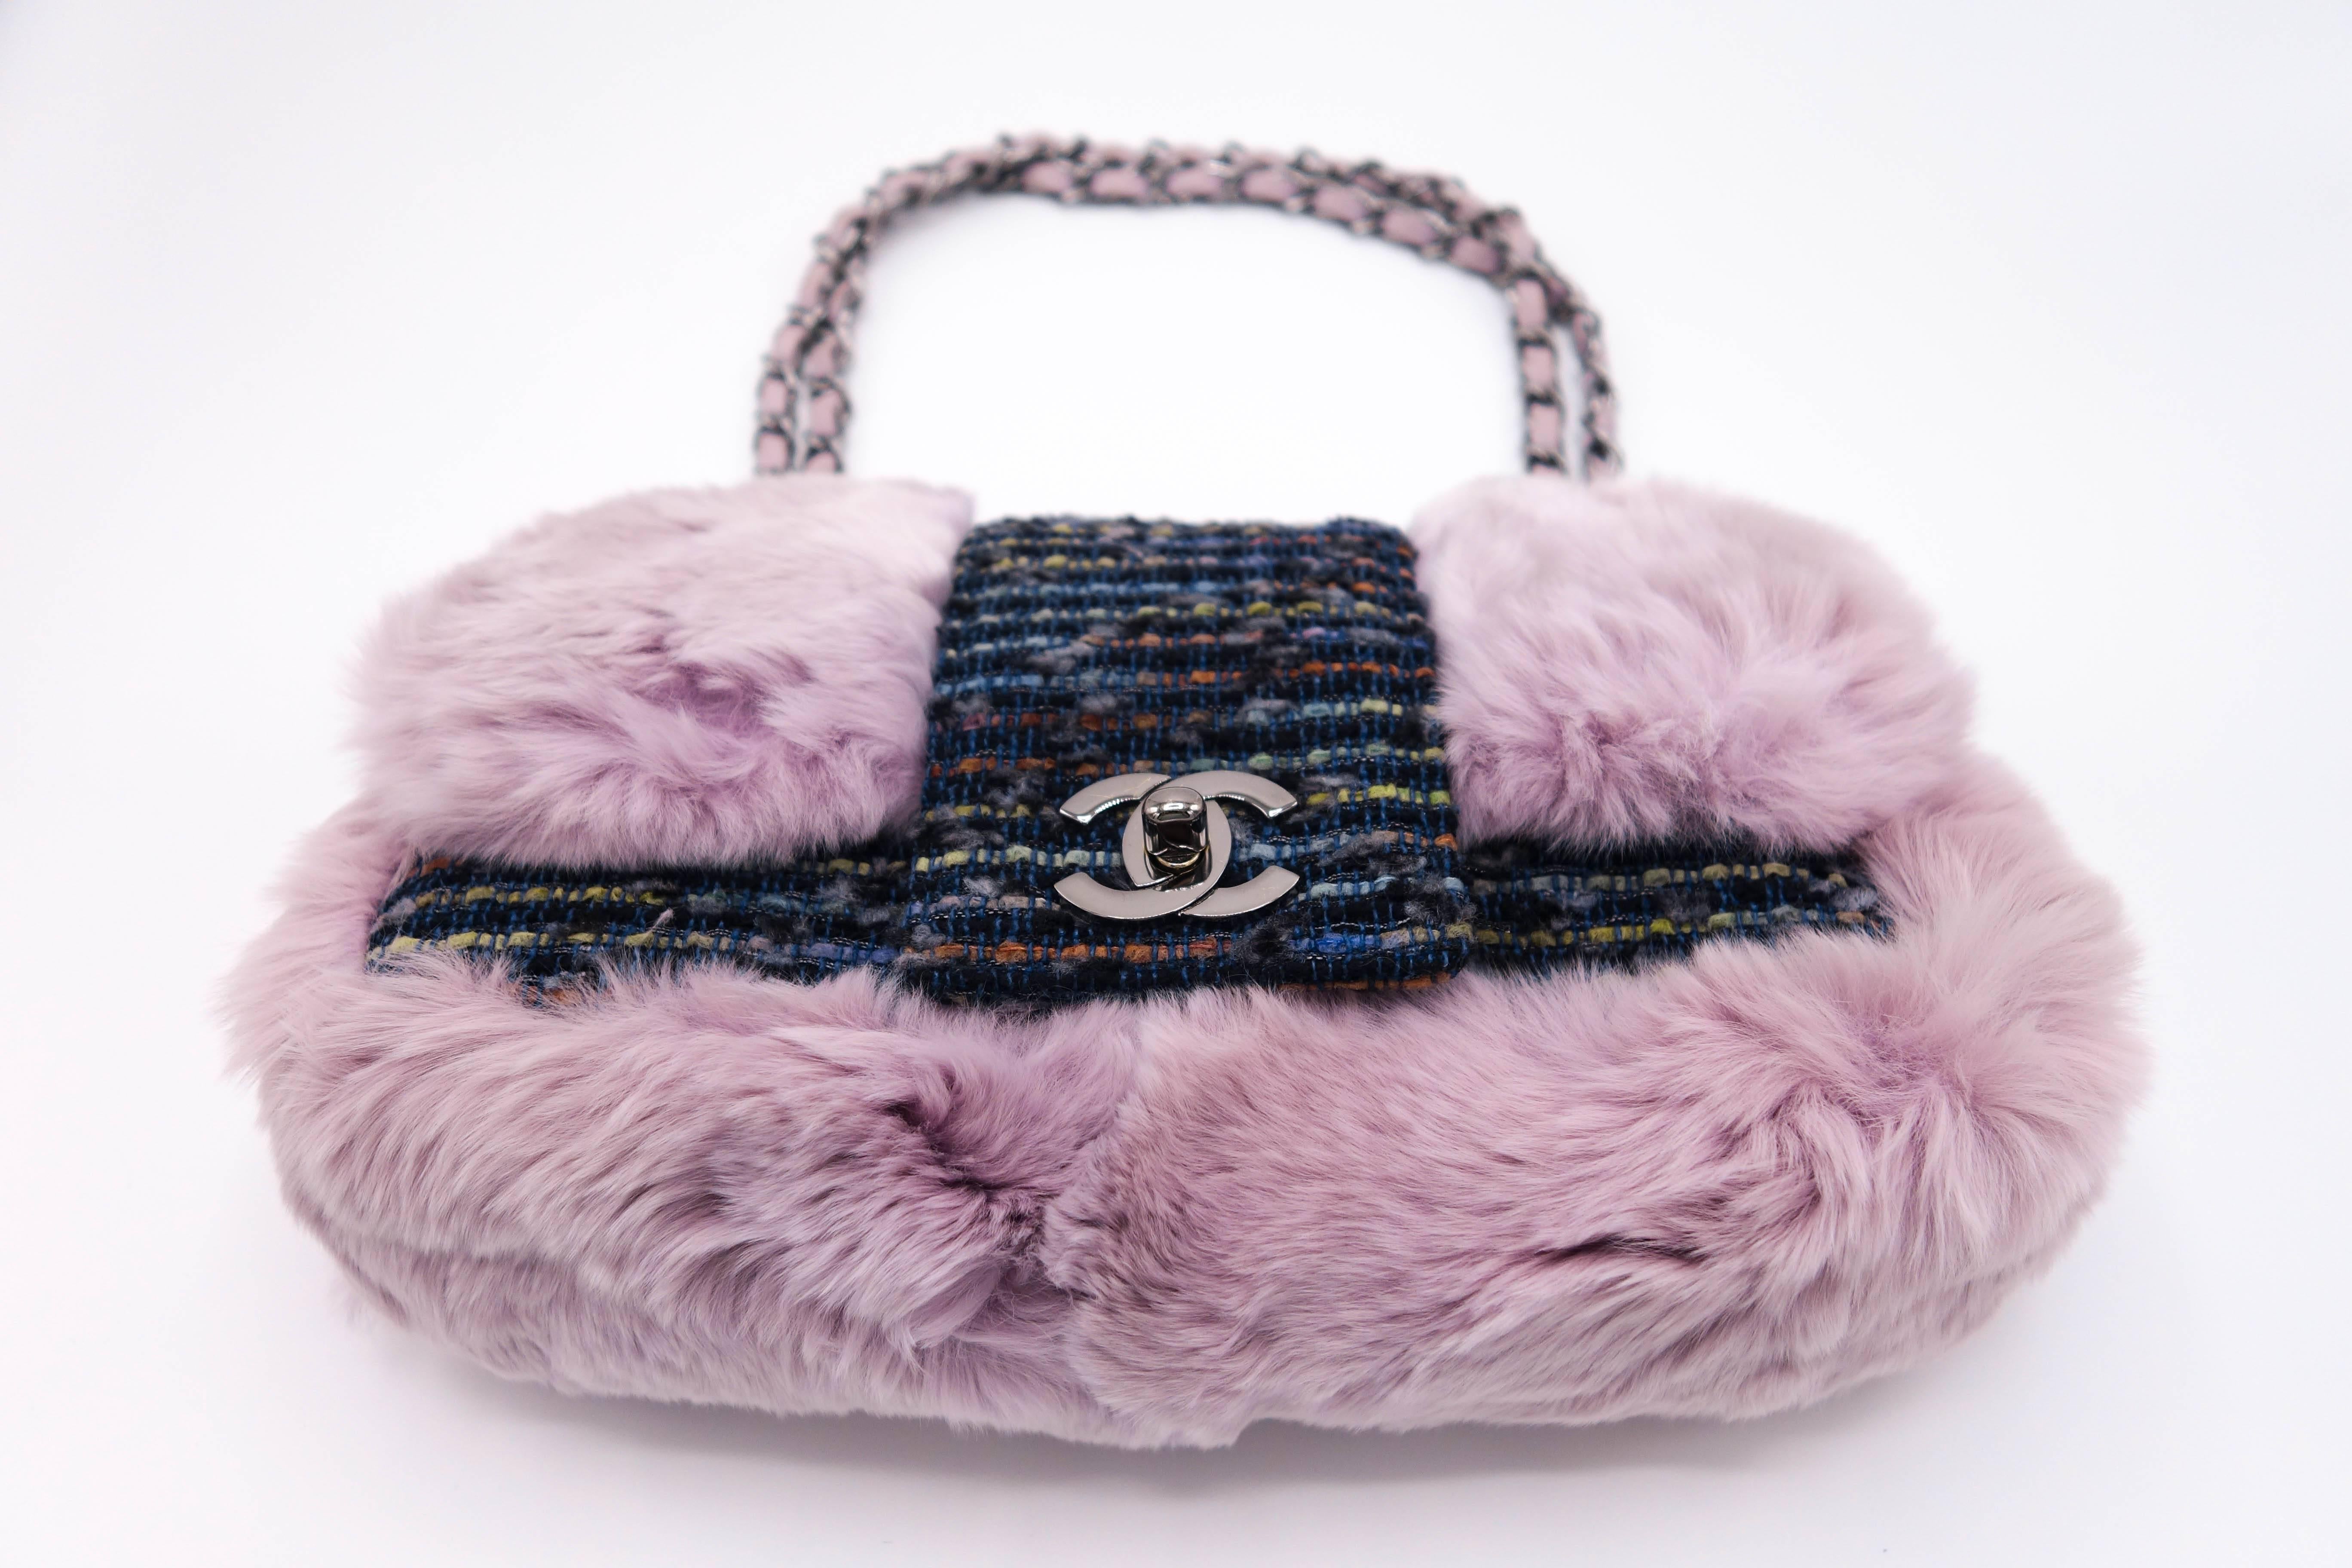 Brand new beautiful and rare Chanel glicine lapin & tweed single flap purple fur bag. The fur is extremely soft. Shoulder strap measures 9"L. Must have for your winter wardrobe. 

Comes with authenticity card, dustbag and box. 